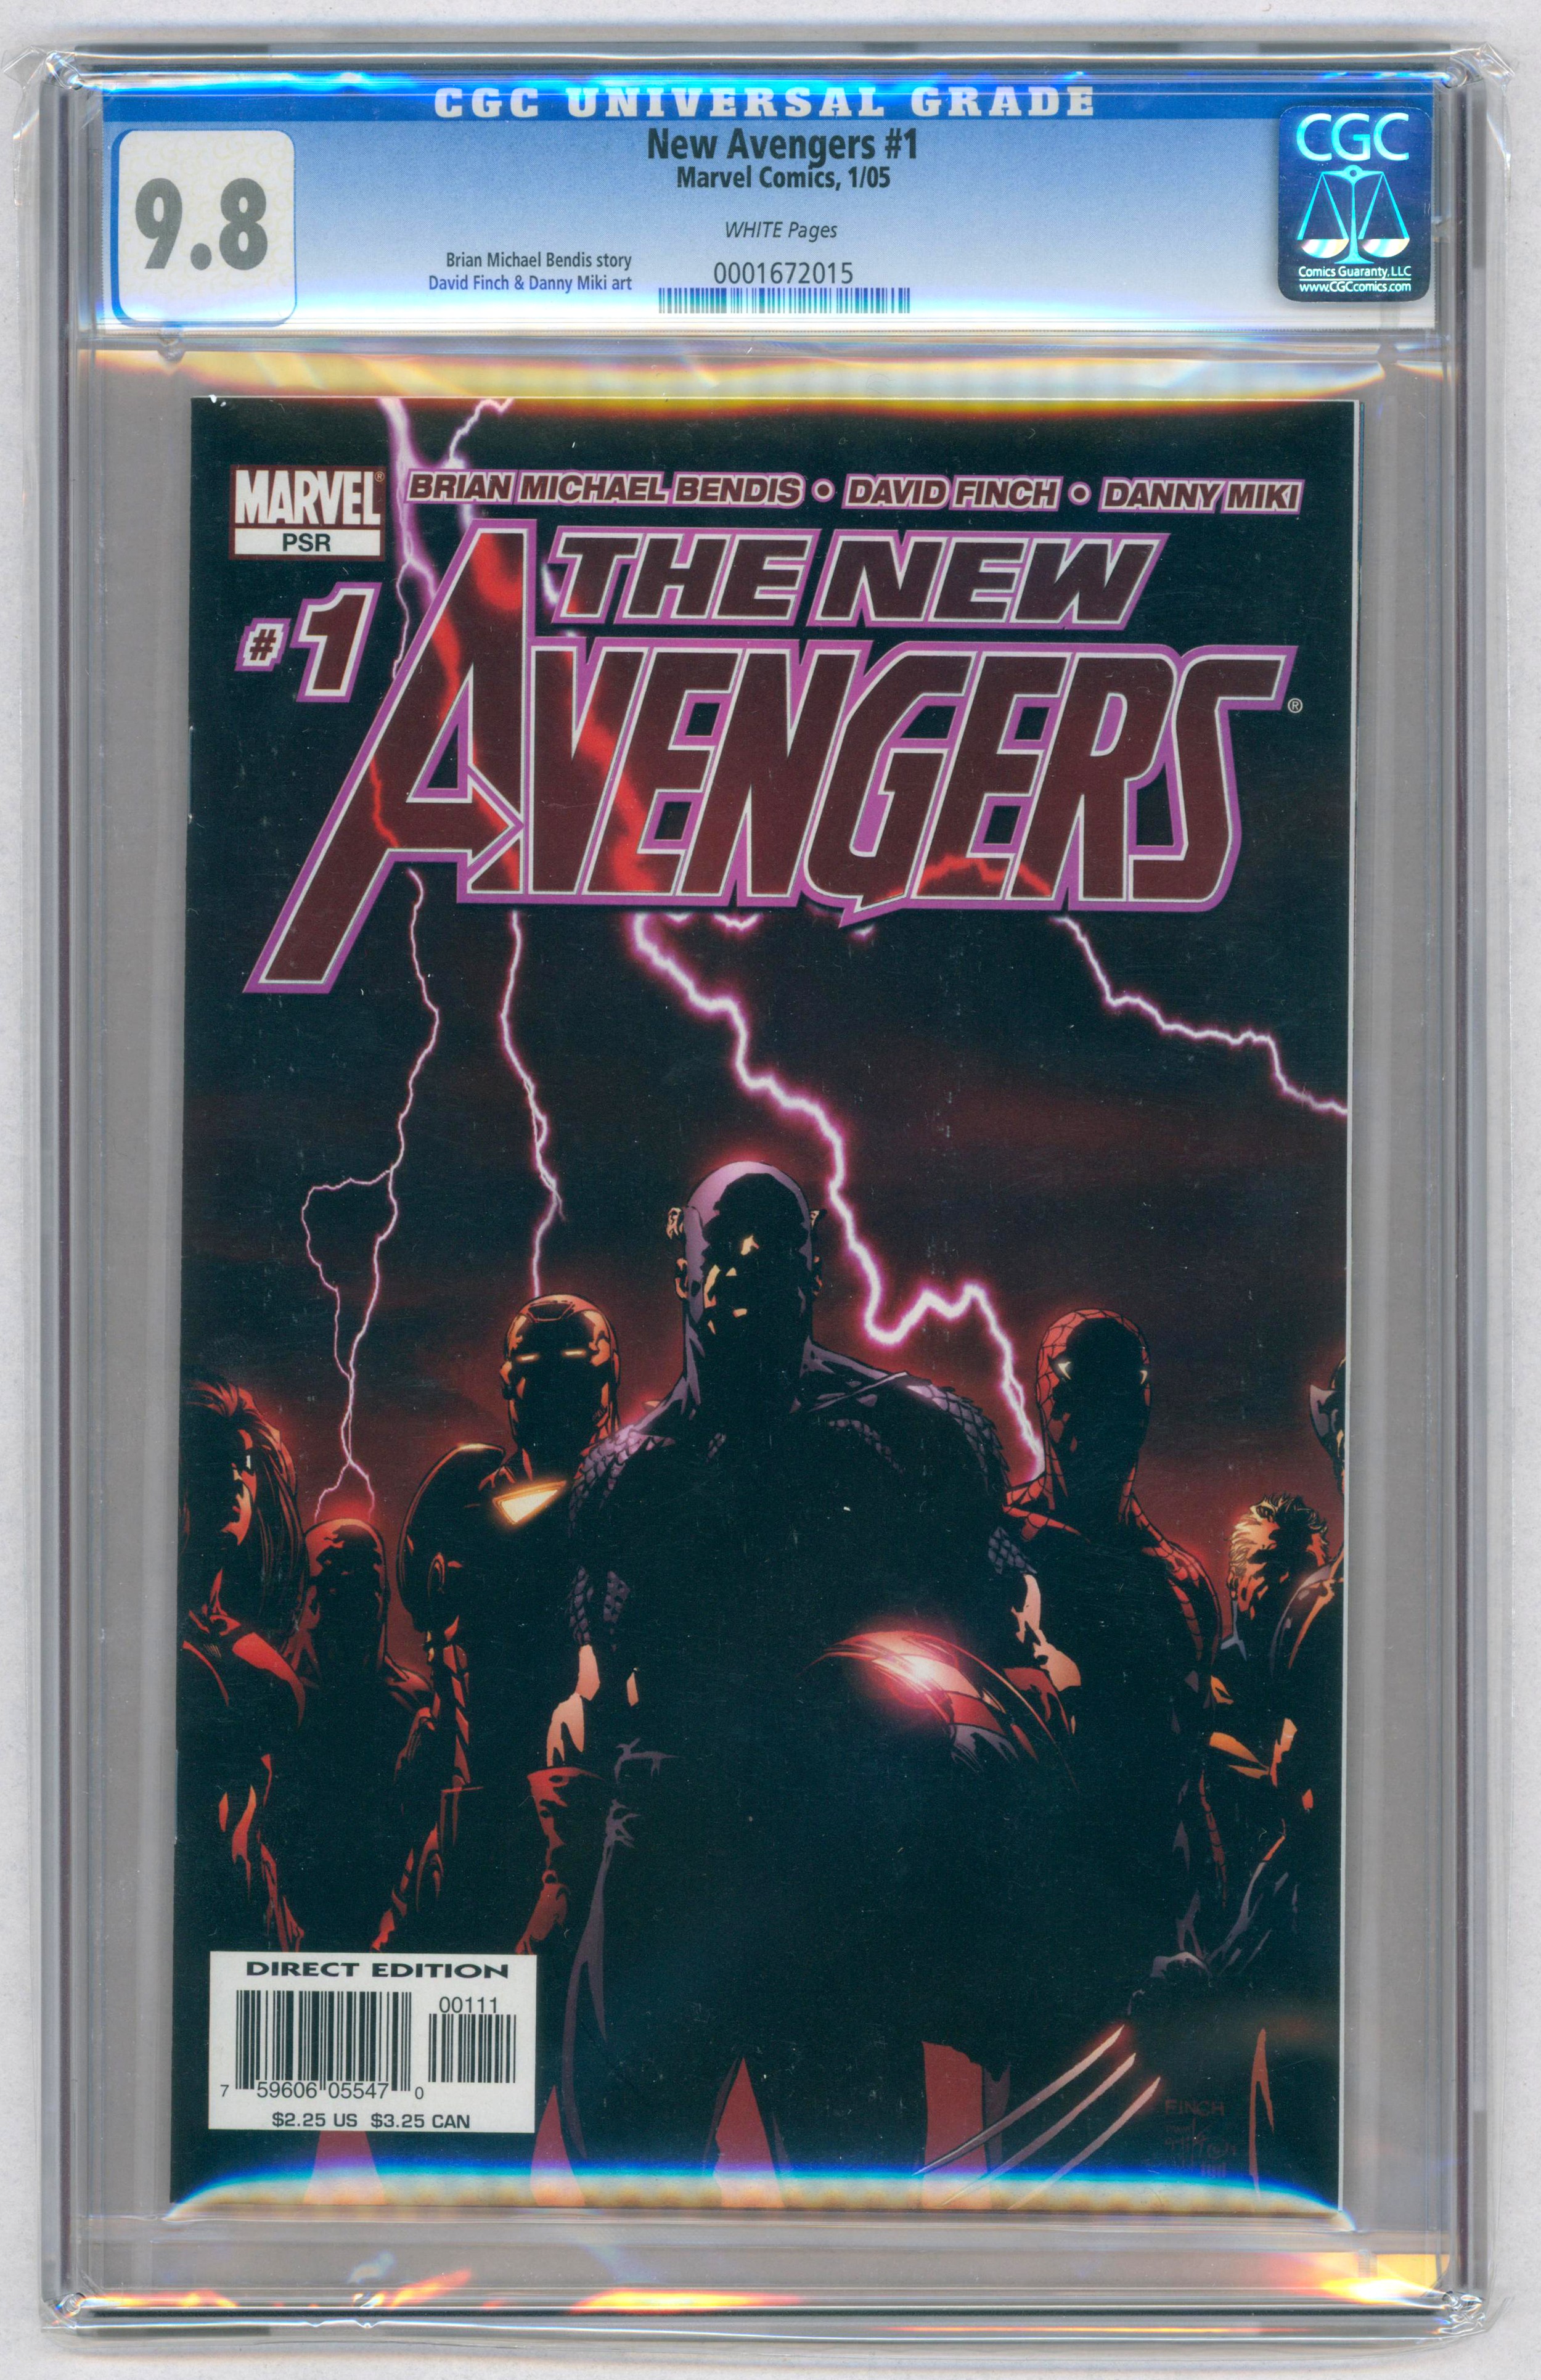 NEW AVENGERS #1 – (Jan. 2005 Marvel Comics) – GRADED 9.8 by CGC – Signed by Paul Jenkins on 11/22/